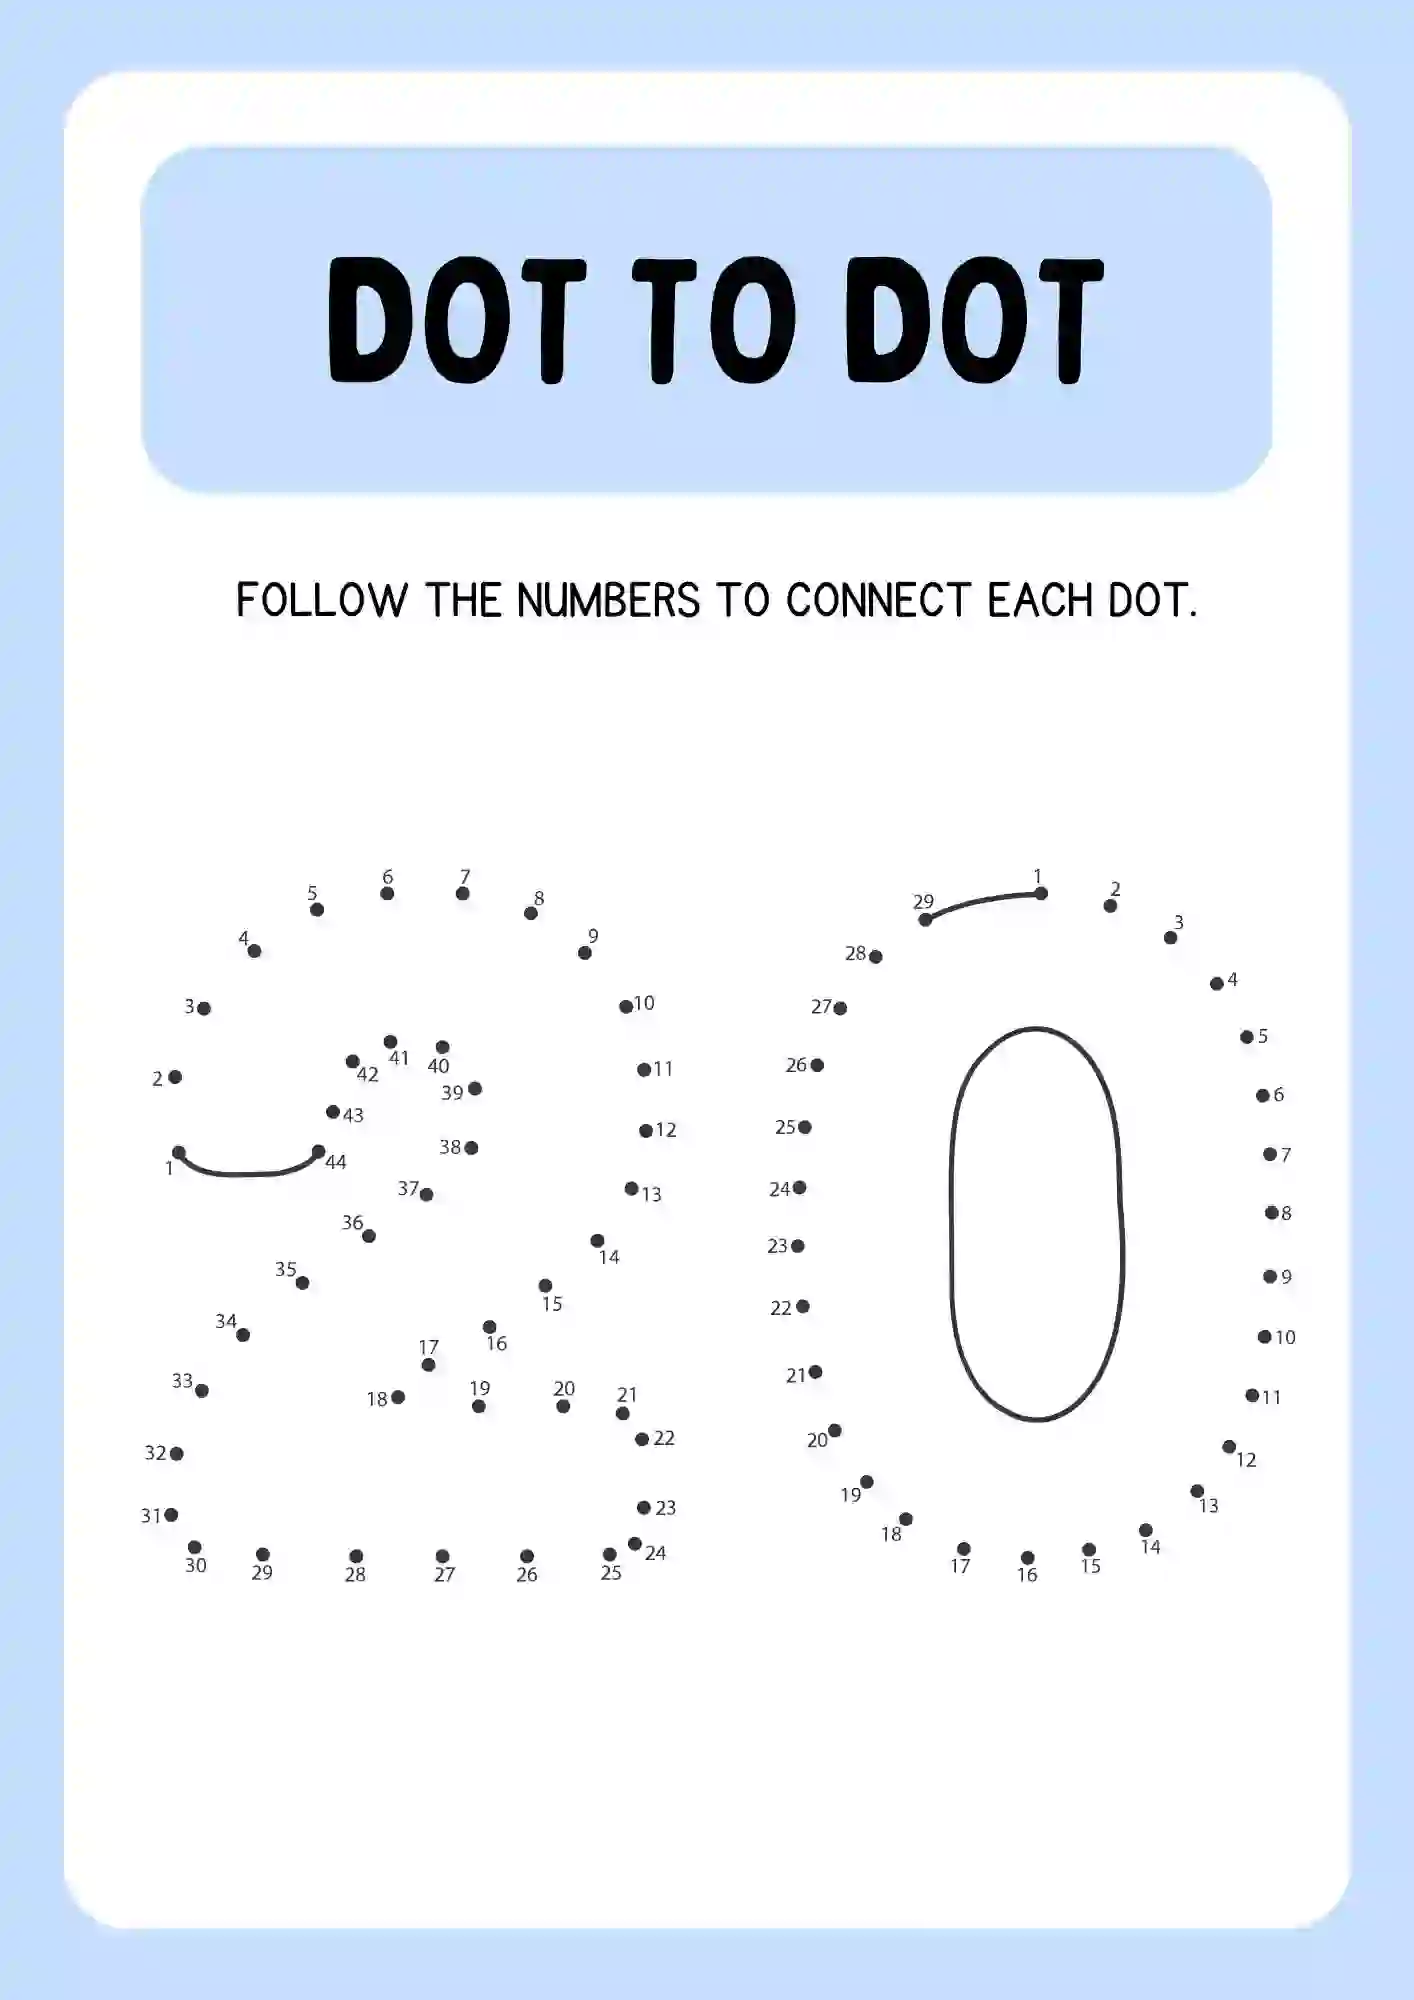 Dot to Dot Connecting Numbers Activity Worksheets number 20